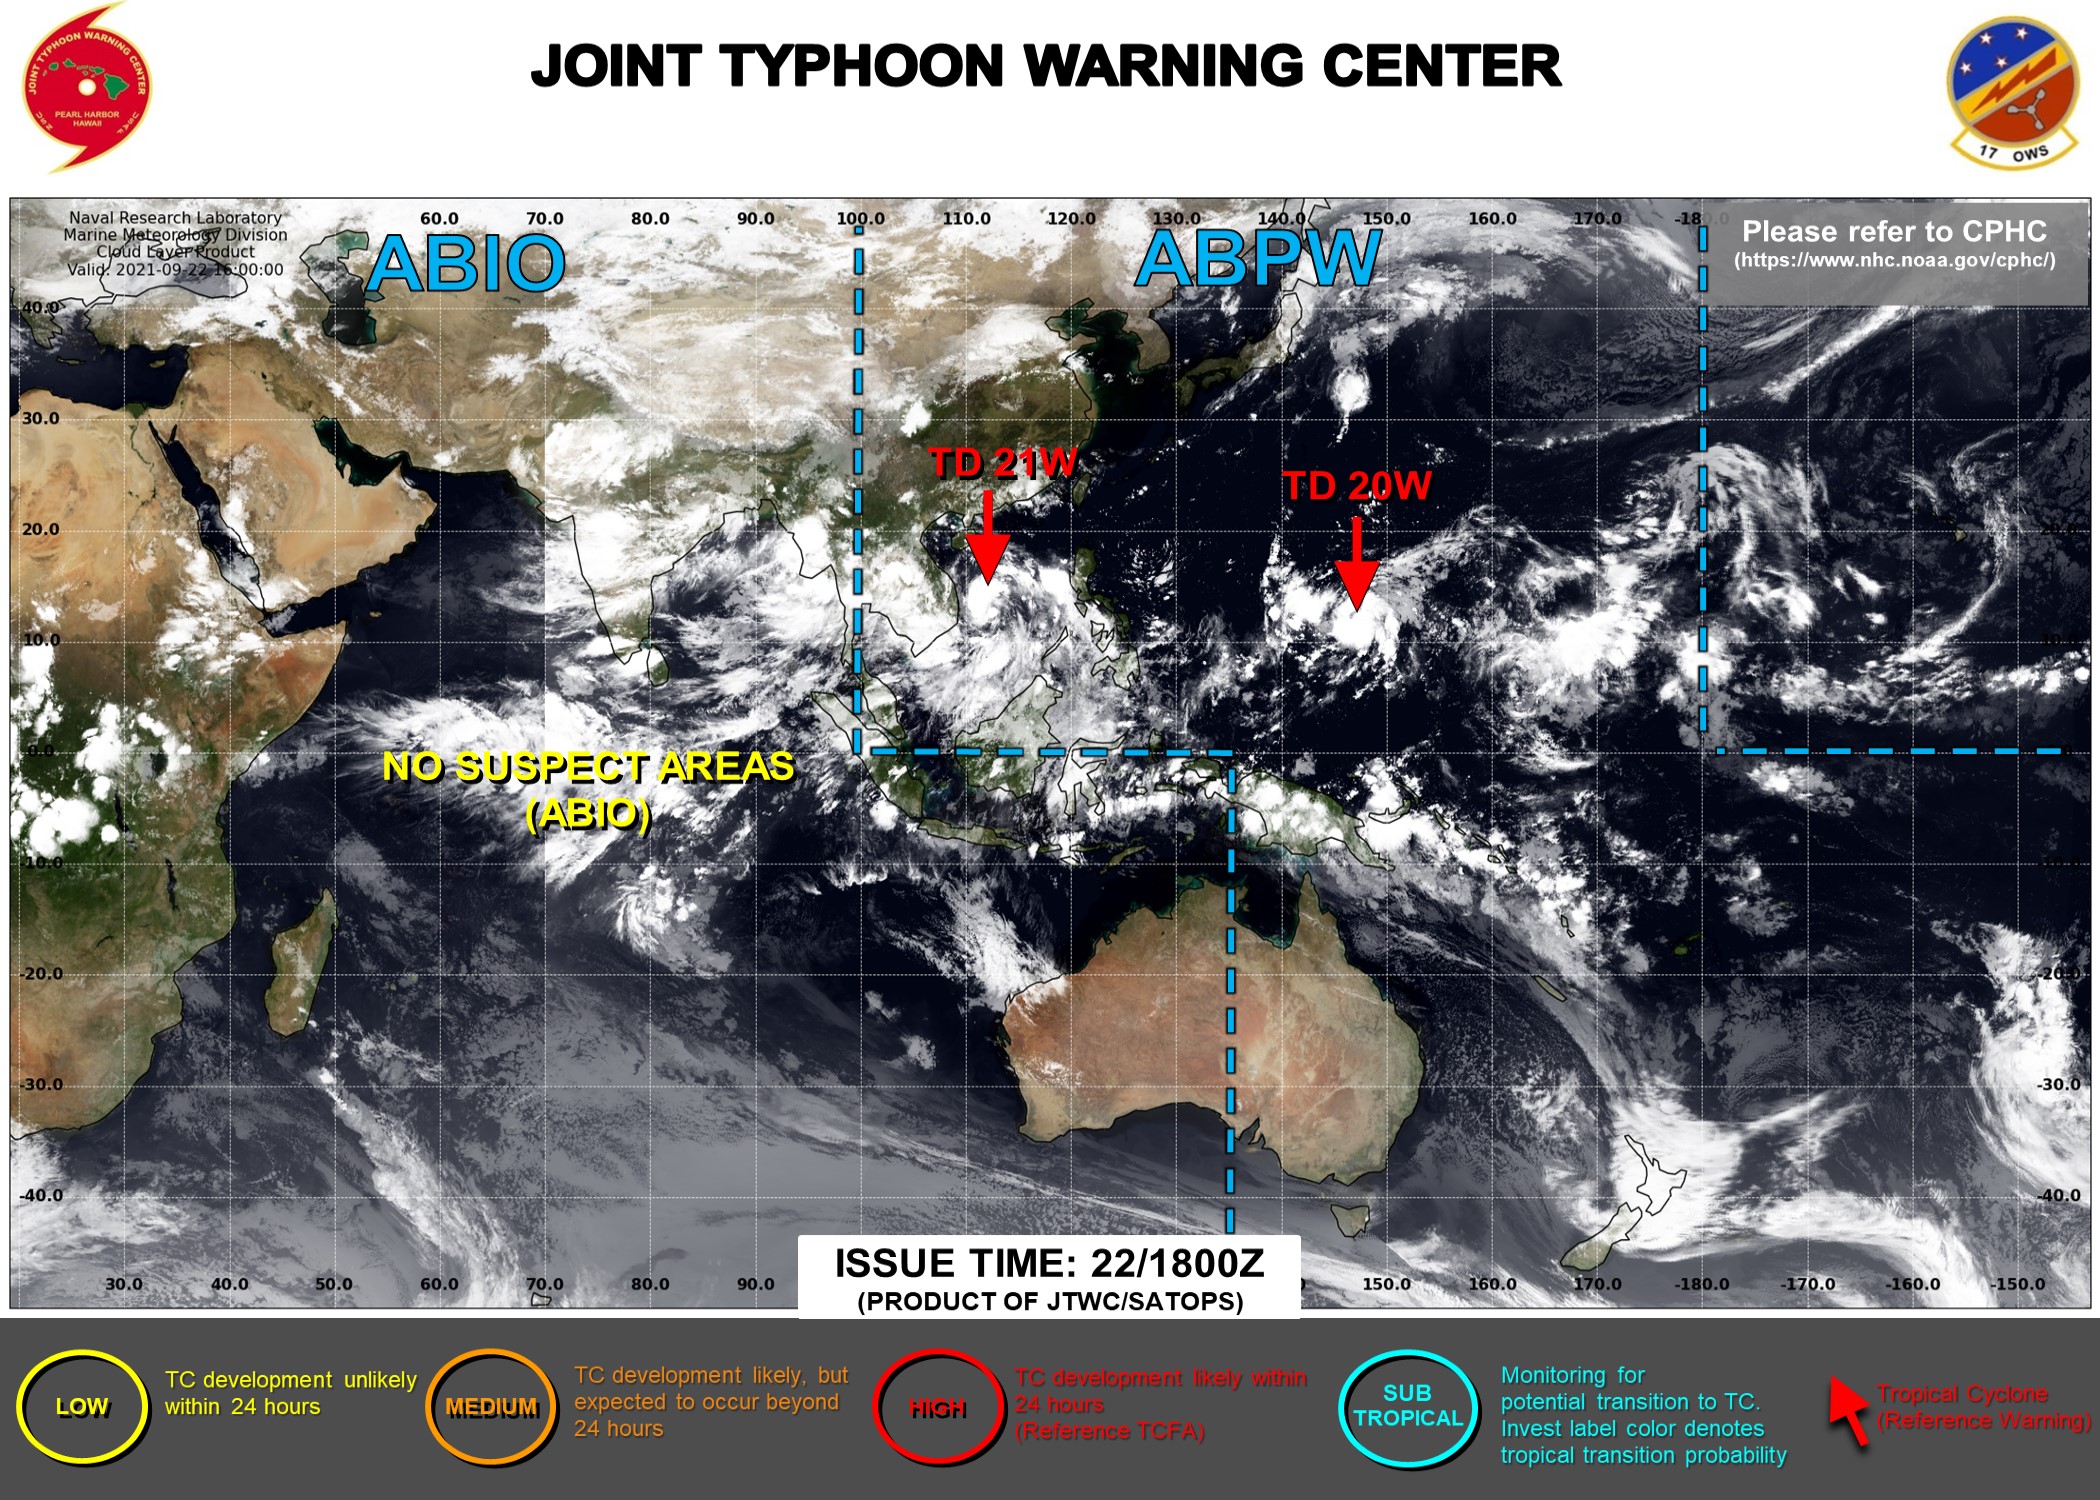 JTWC IS ISSUING 6HOURLY WARNINGS AND 3HOURLY SATELLITE BULLETINS ON 20W AND 21W.